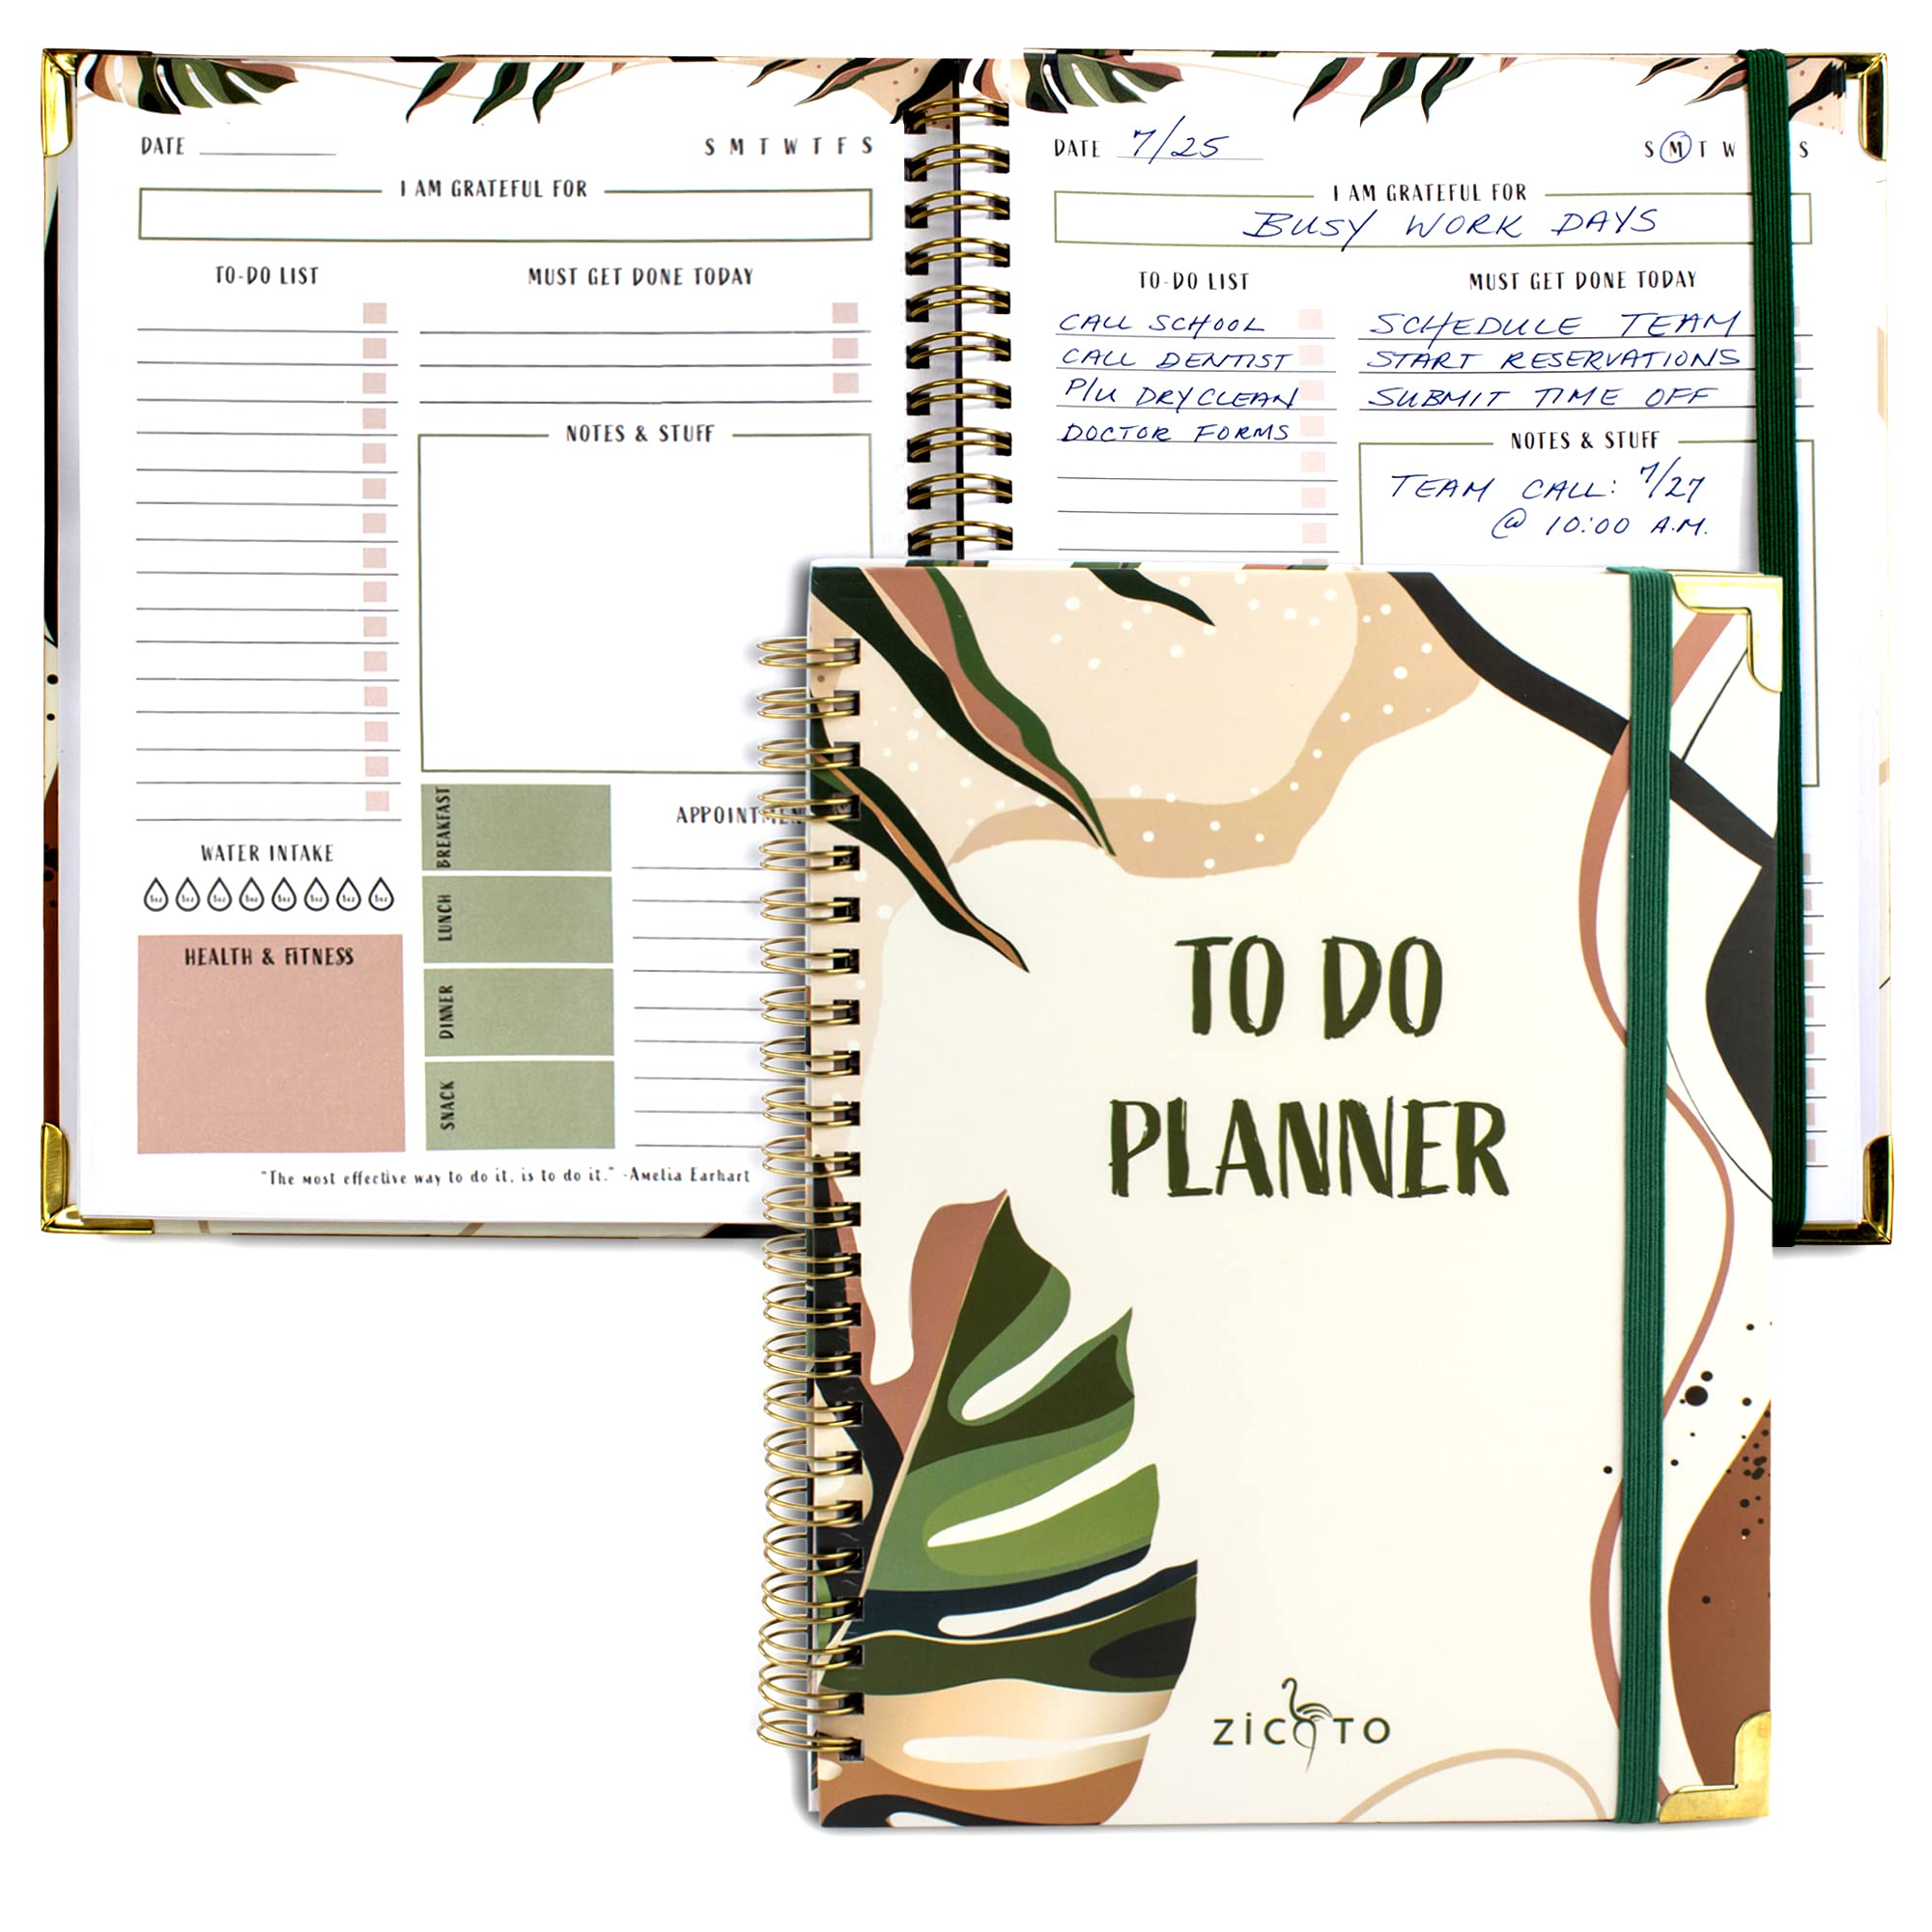 ‎ZICOTO + Simplified To Do List Planner Notebook